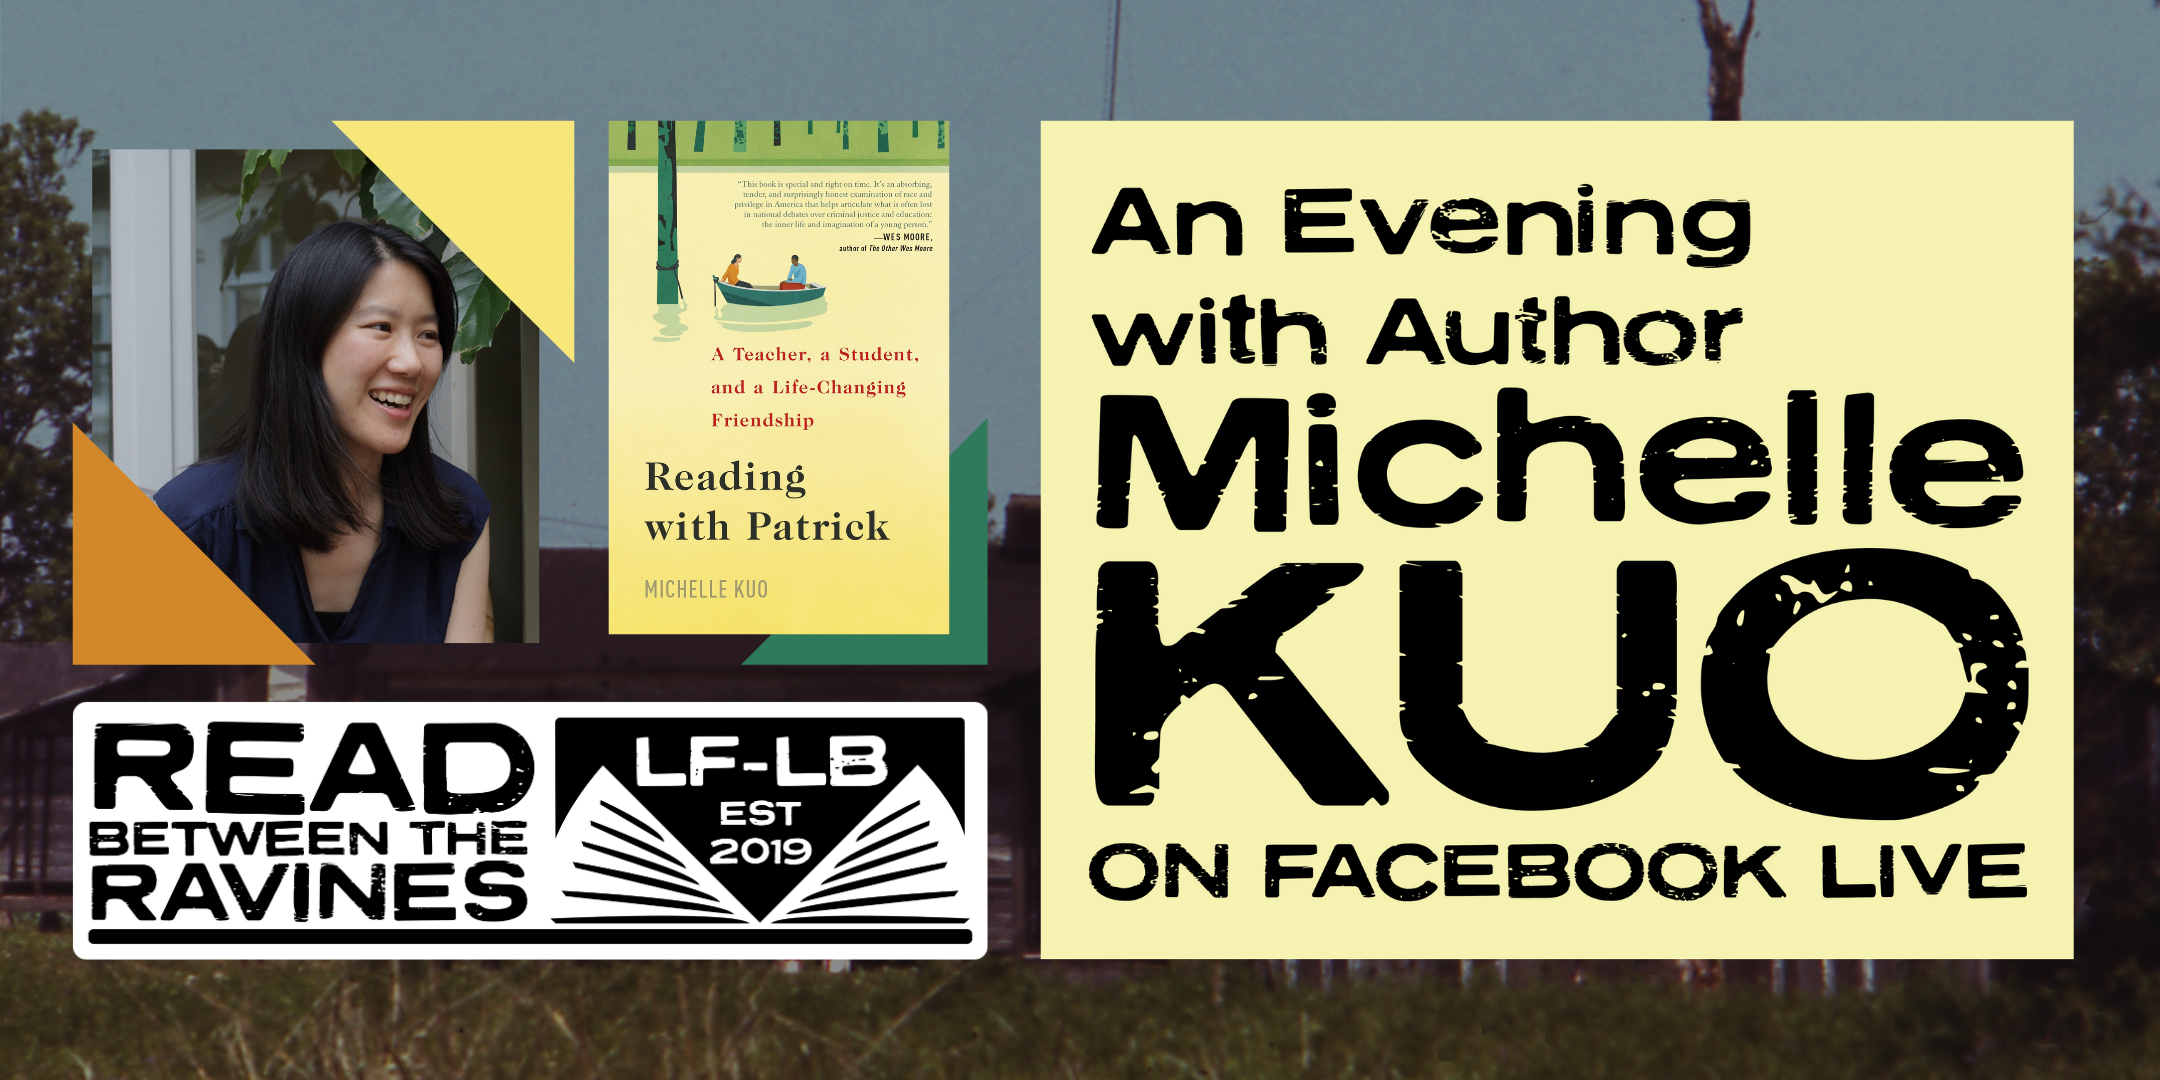 An Evening with Michelle Kuo event image